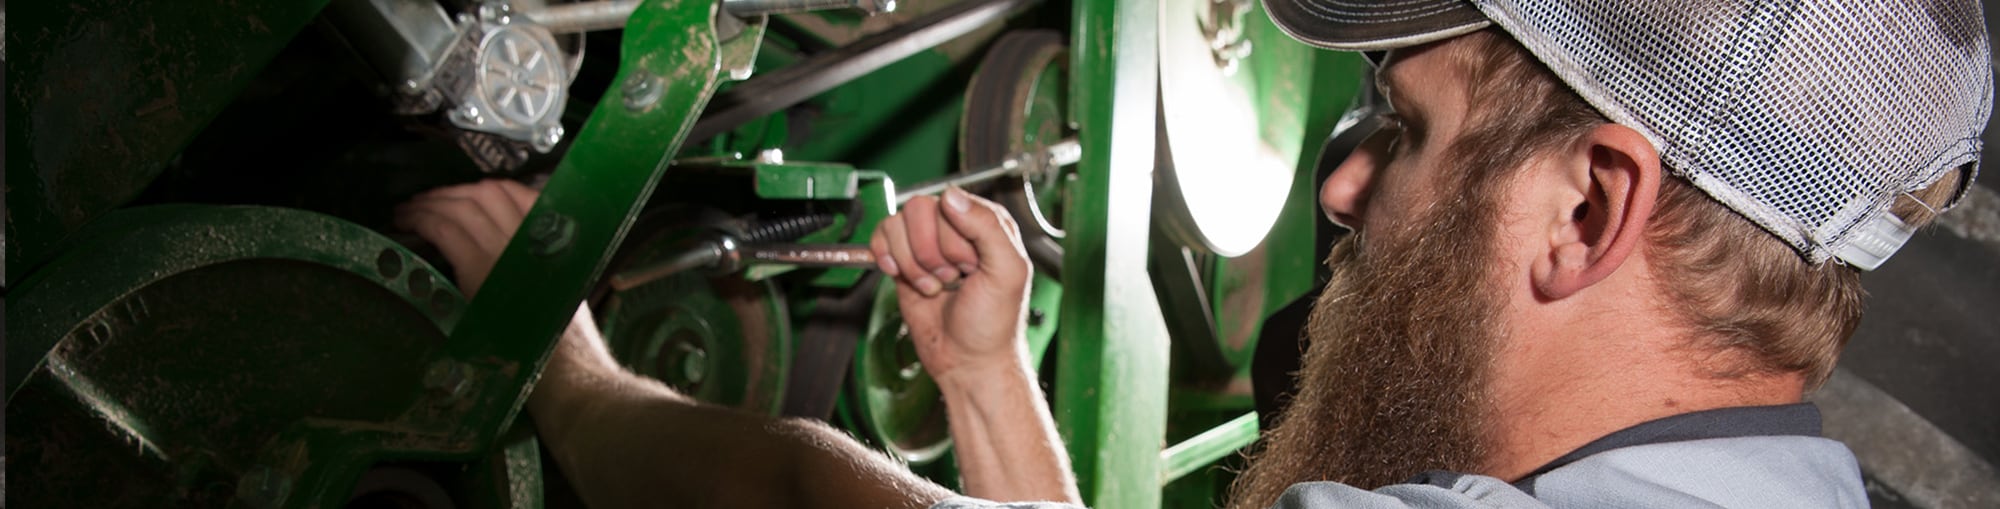 A technician examines the parts of a combine